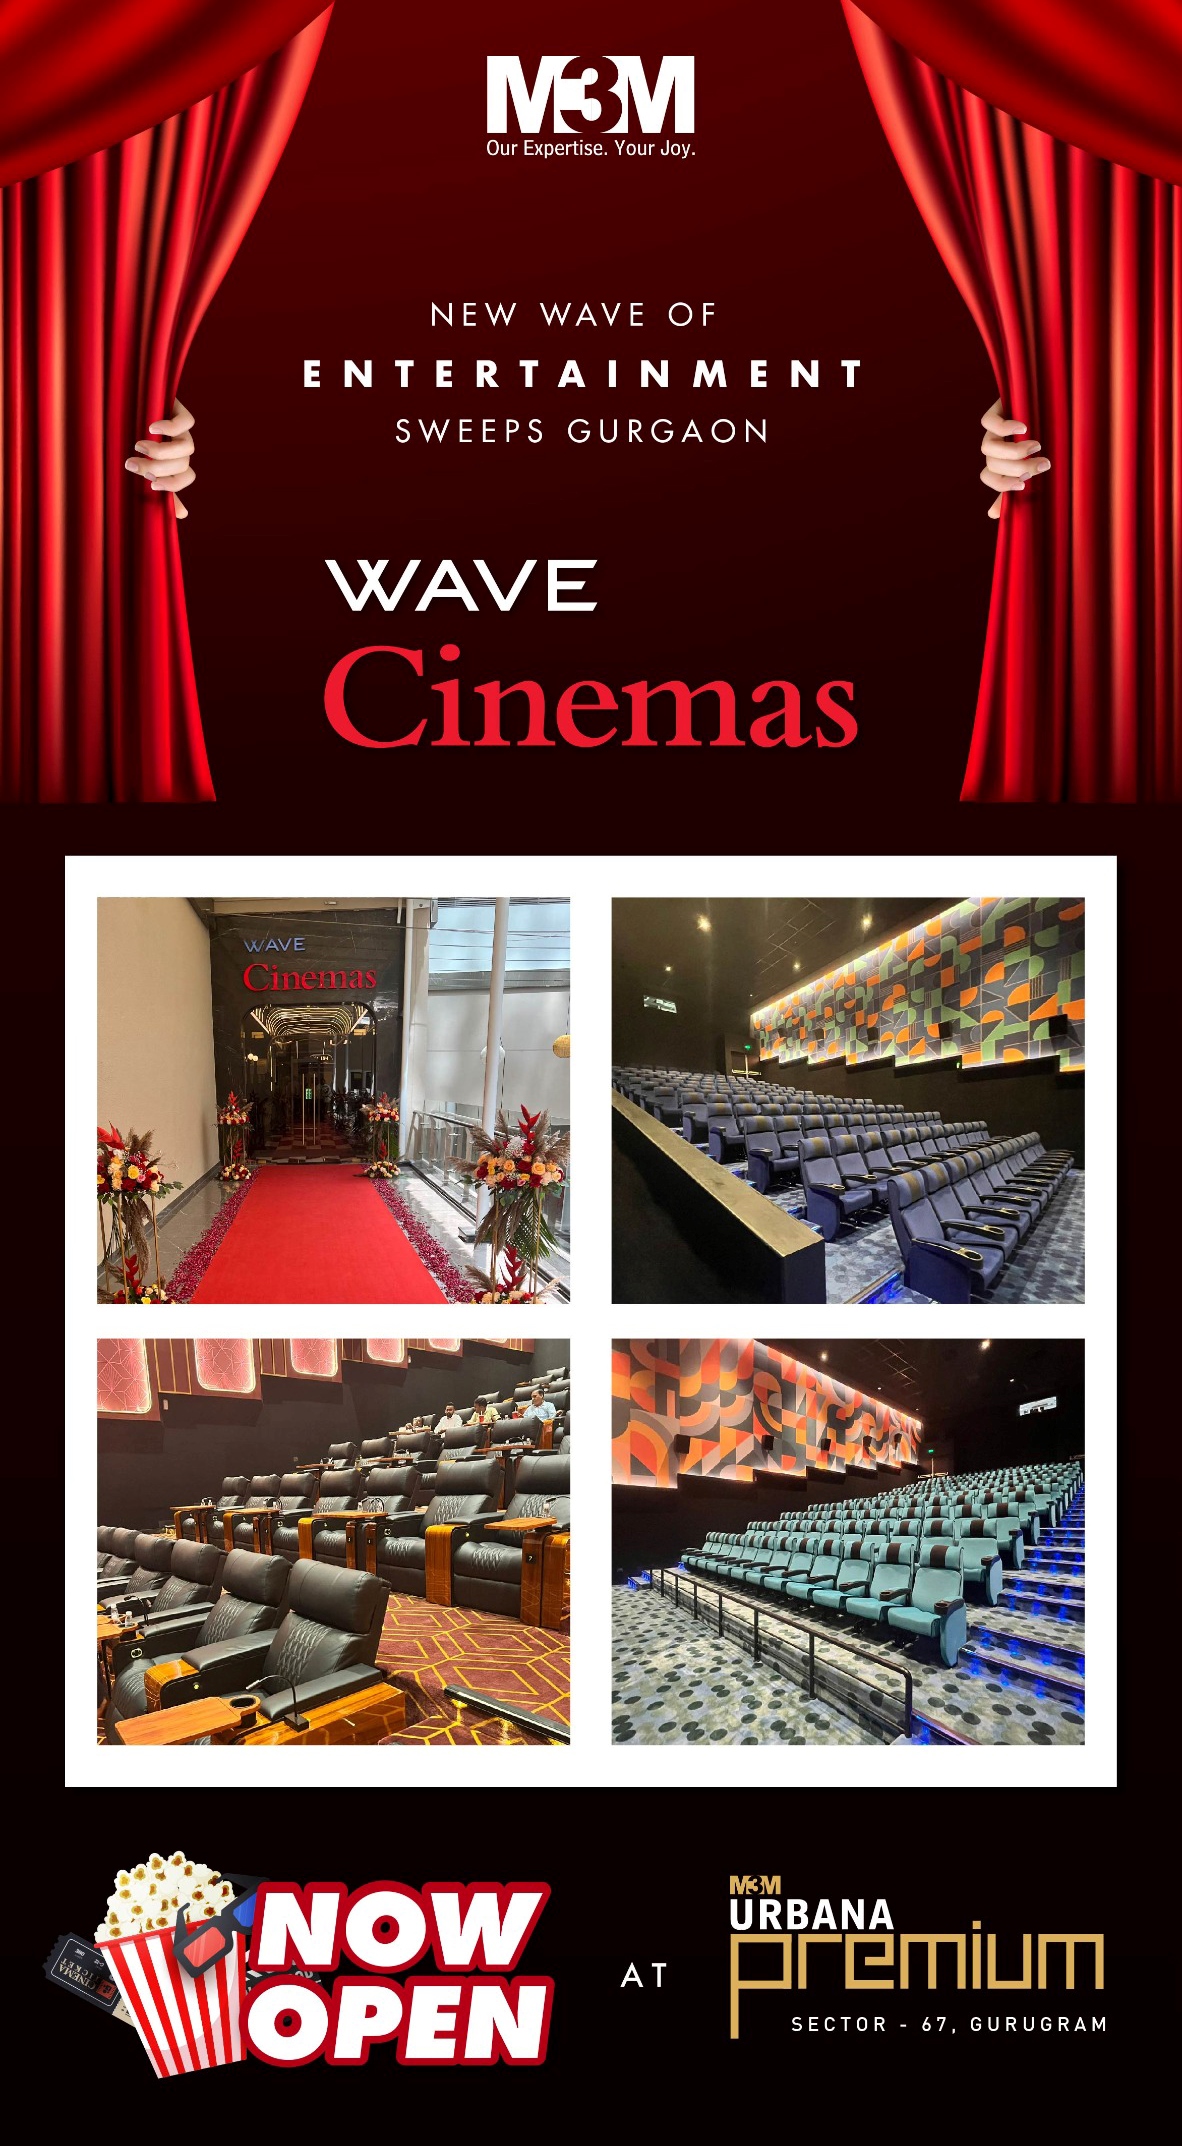 Get ready for blockbuster bliss with Wave Cinemas now open at M3M Urbana Premium, Gurgaon Update